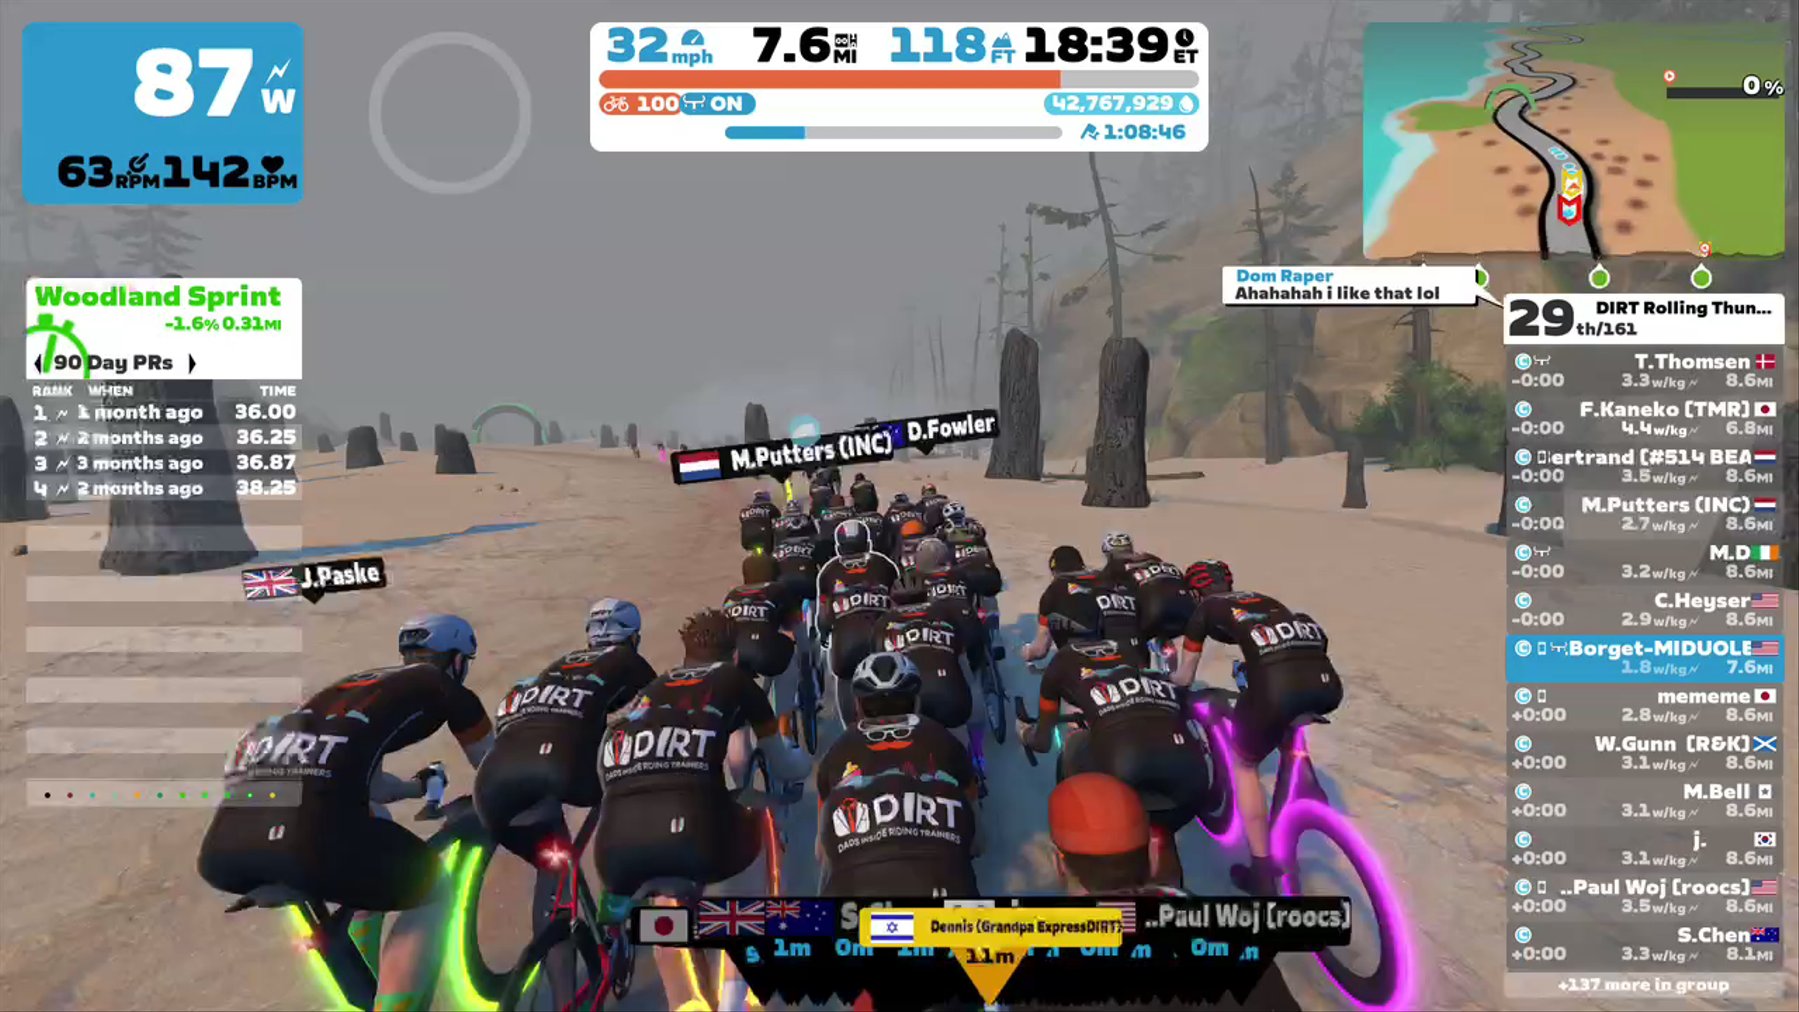 Zwift - Group Ride: DIRT Rolling Thunder (C) on The Big Ring in Watopia